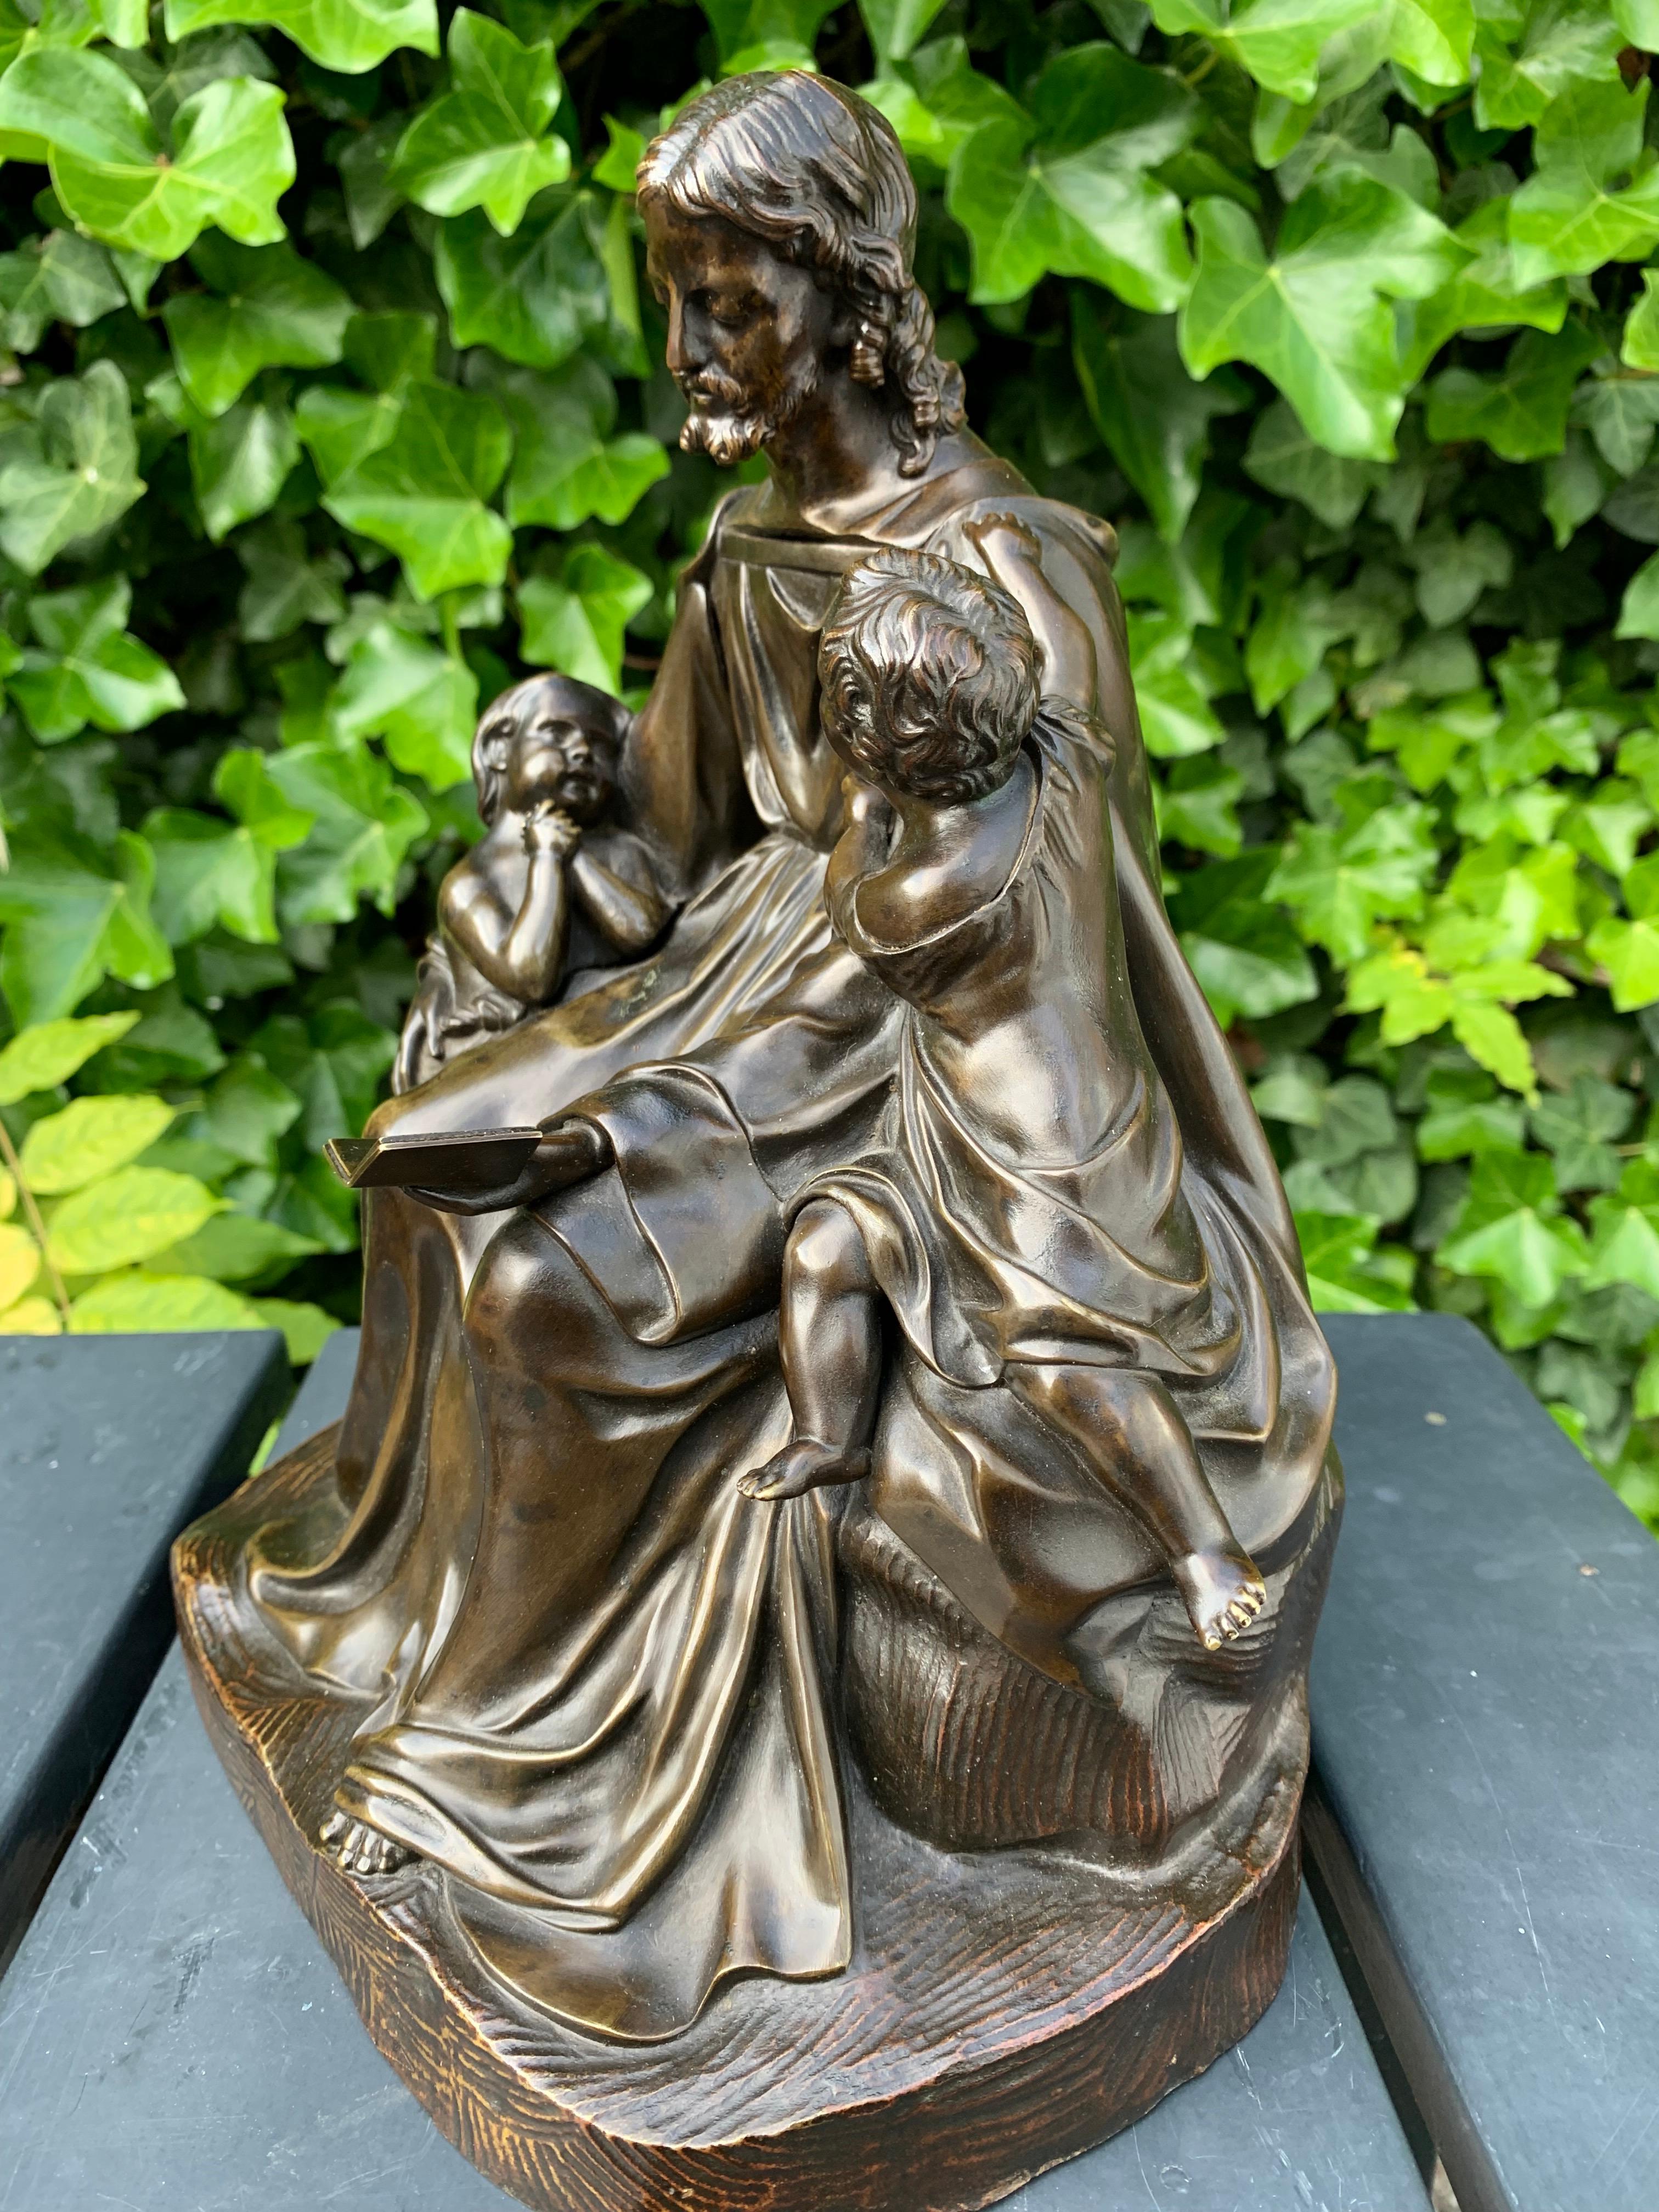 Hand-Crafted Antique Bronze Religious Art Sculpture / Statue Depicting Christ with Children For Sale